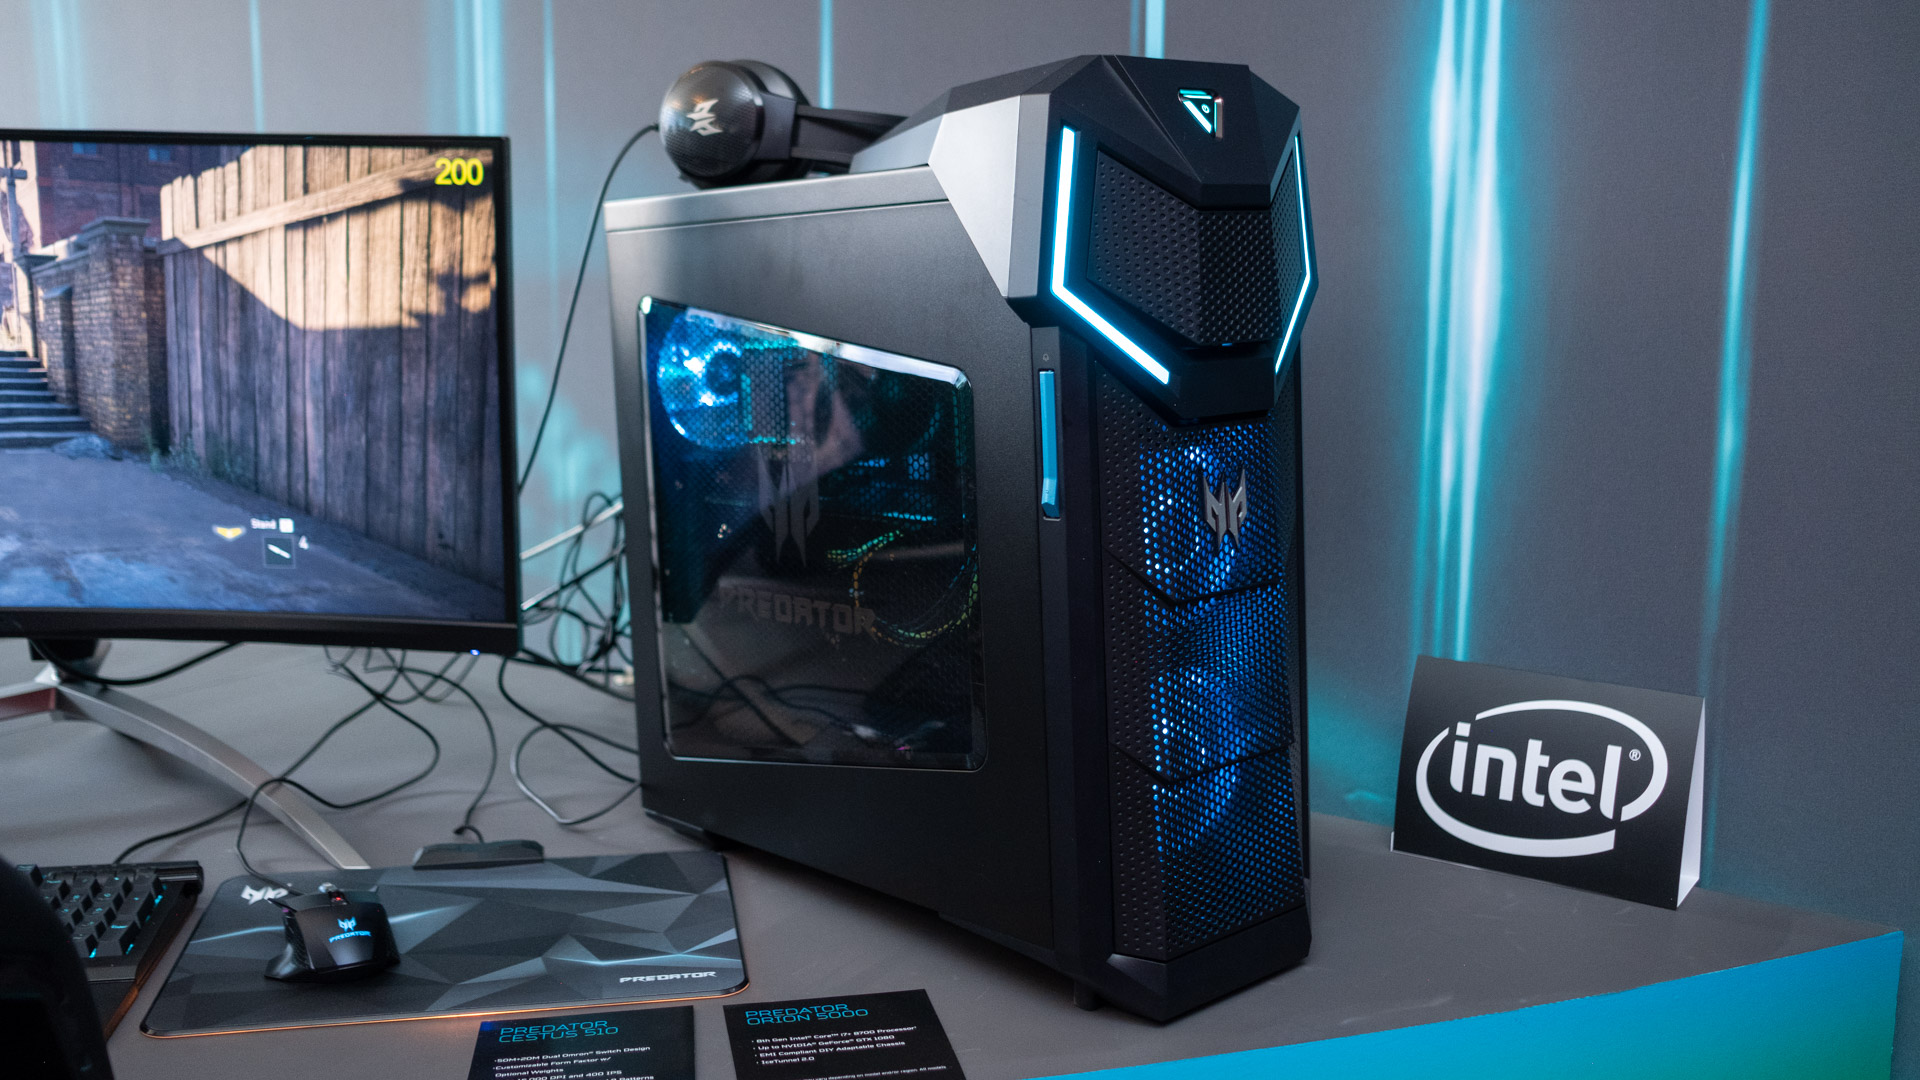 Acer Predator Orion 5000 Review An Aggressive Looking Gaming Desktop